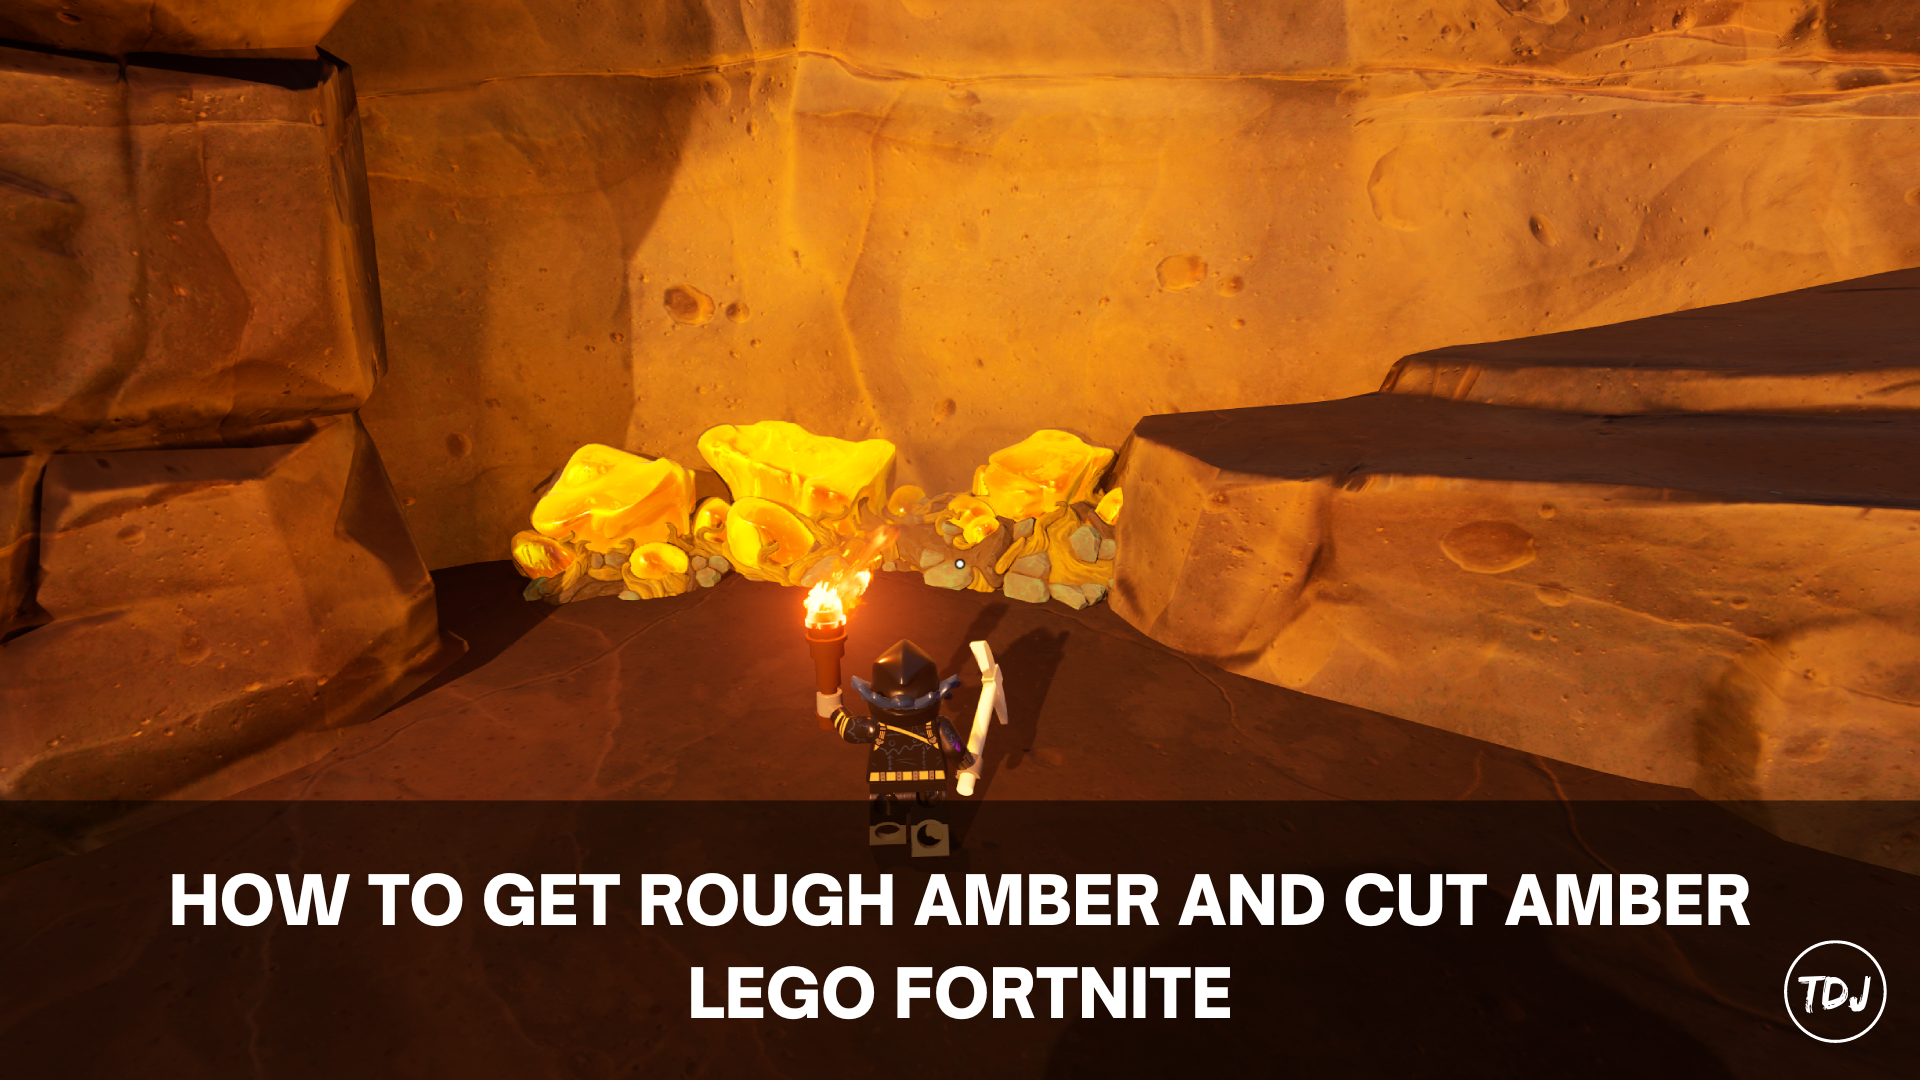 lego fortnite how to get rough amber and cut amber